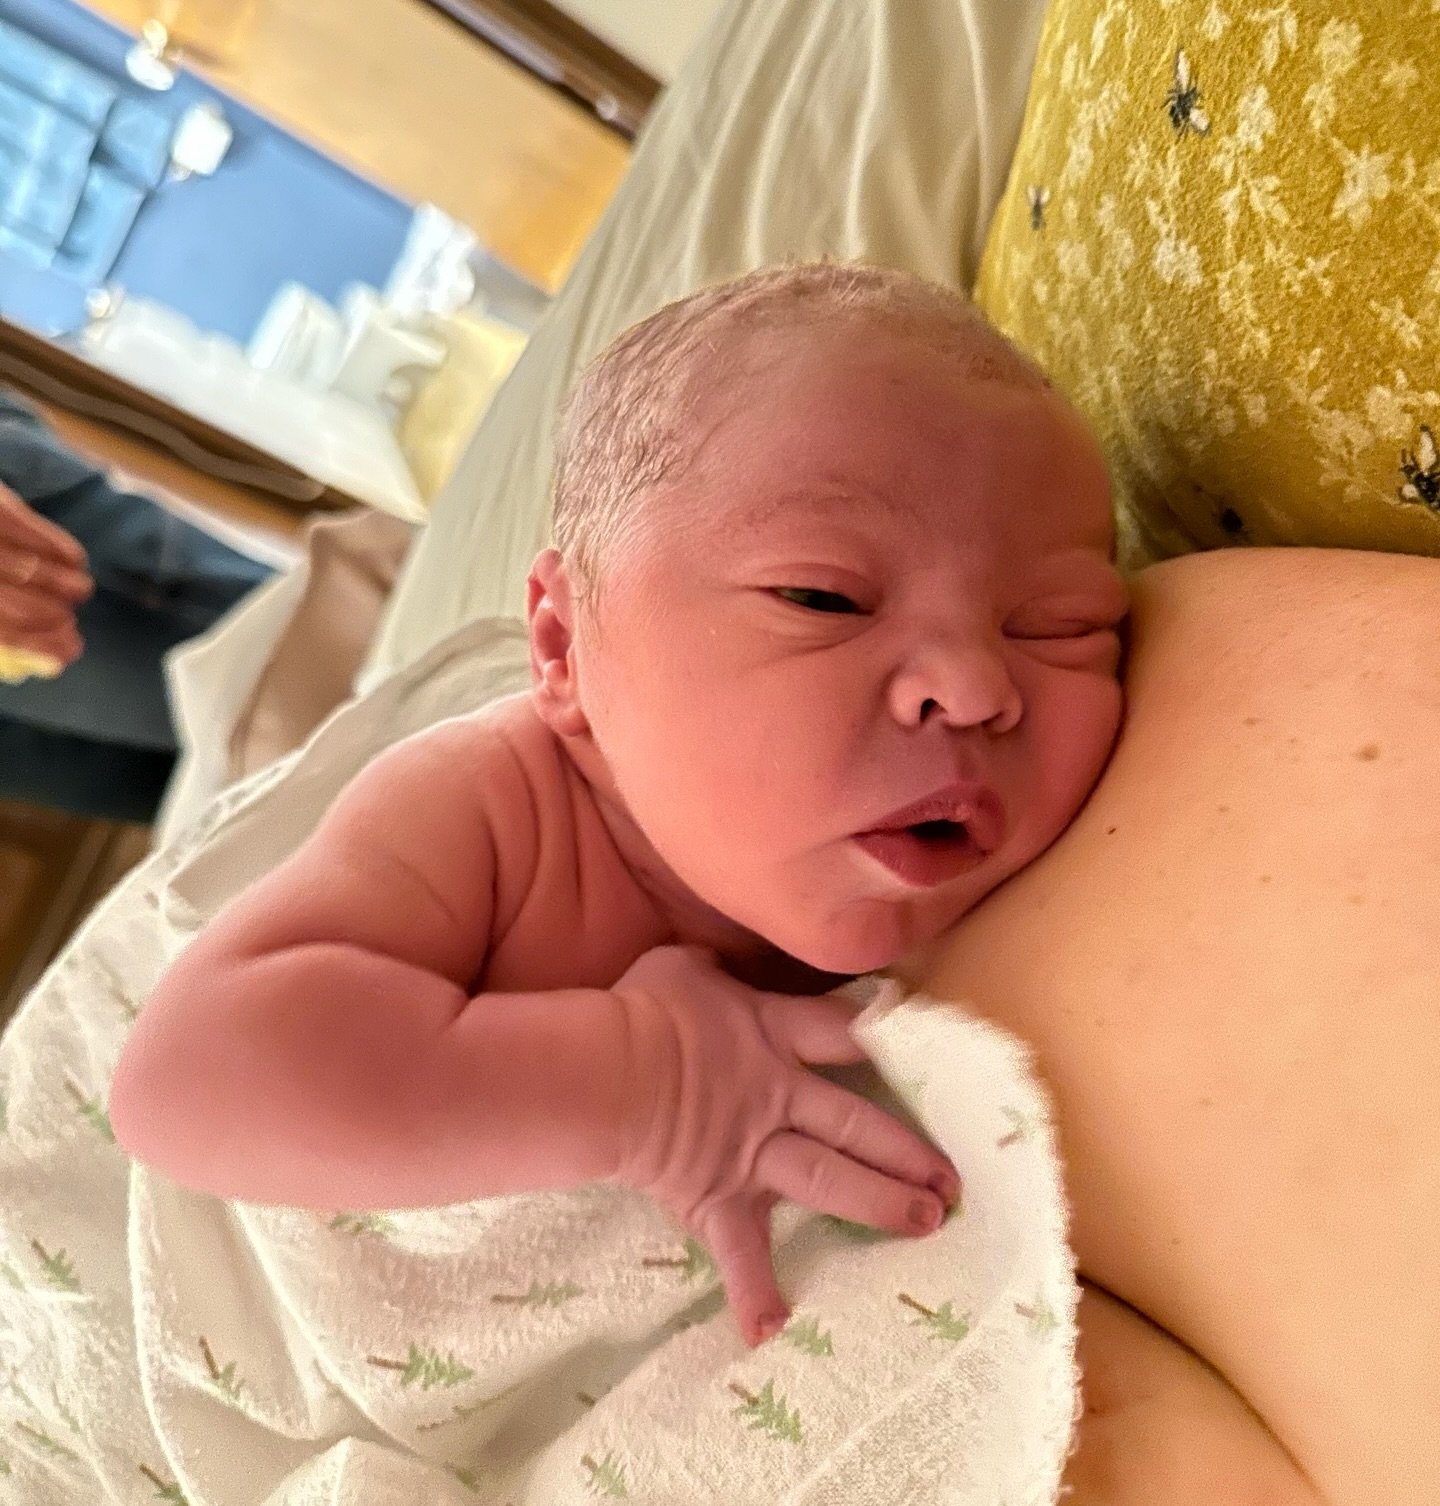 This is Sean! He was born at home last night in a room with his parents, maternal grandma, and us midwives. He joined his family at 41 weeks and 2 days and weighed in just under 9 pounds. Sean&rsquo;s family is really special to us, as we&rsquo;ve he